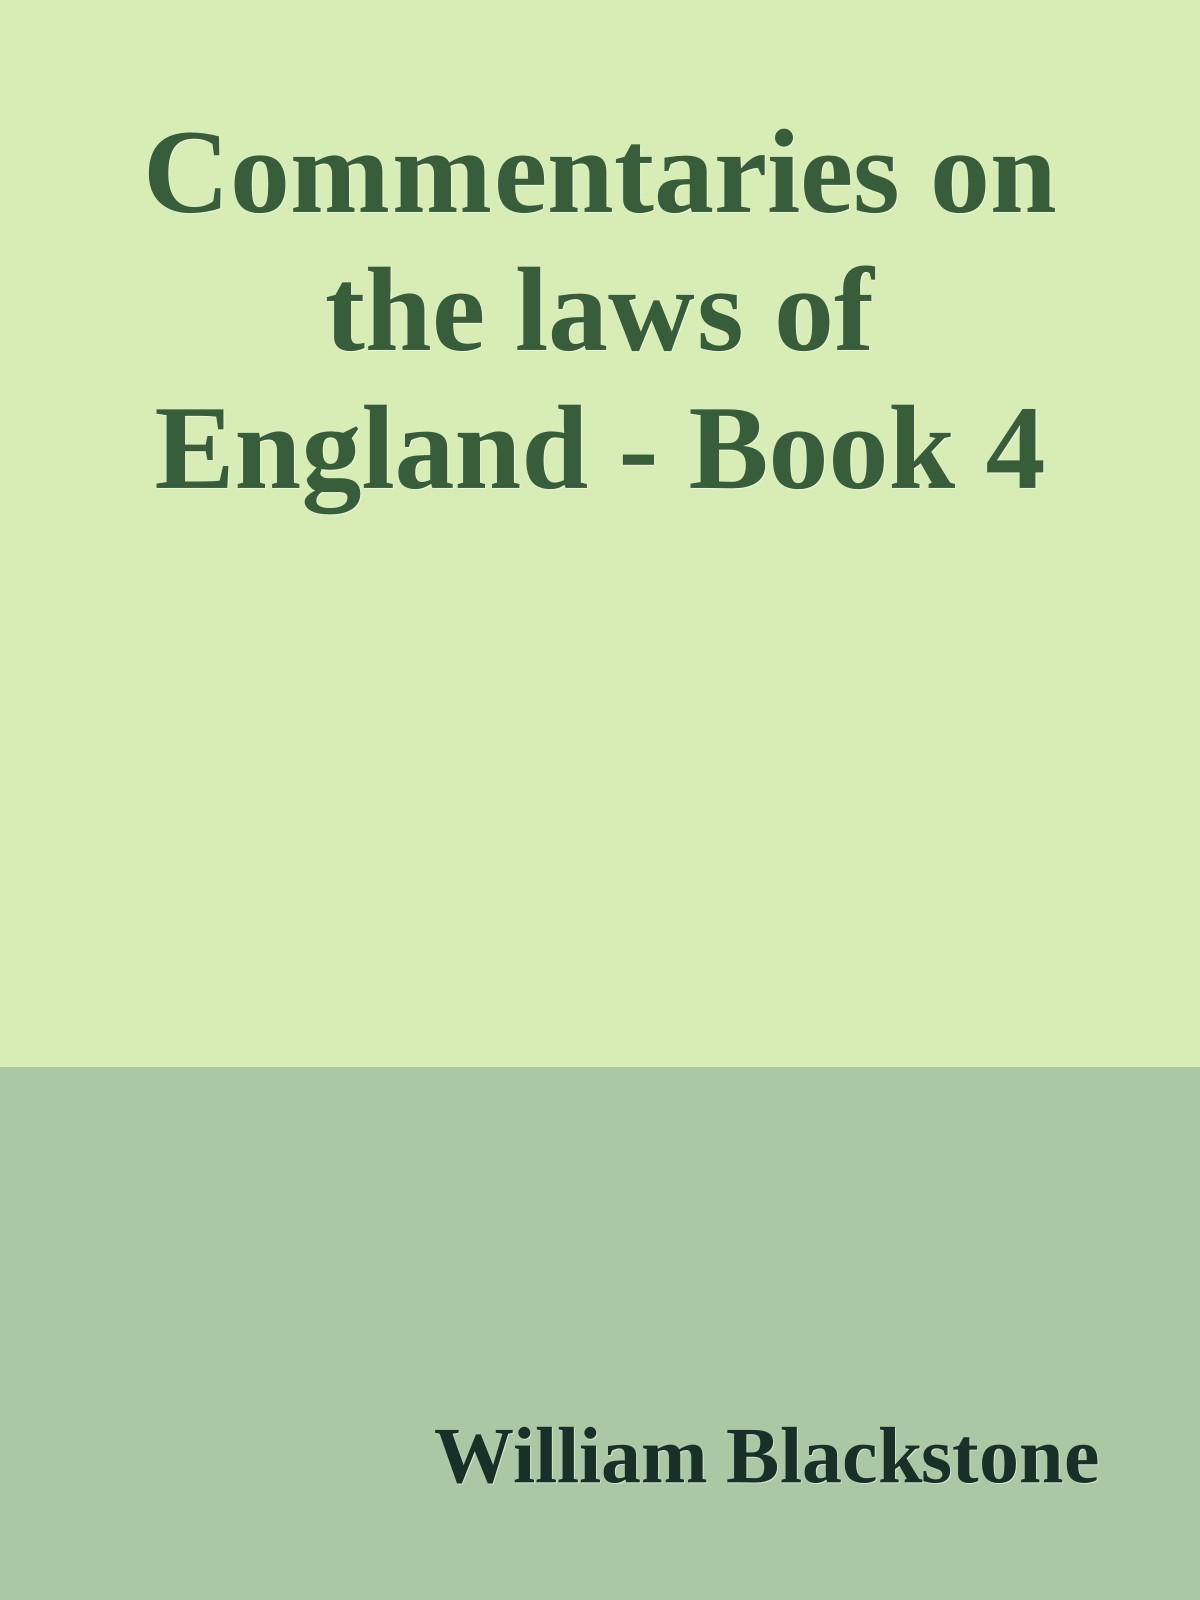 Commentaries on the laws of England - Book 4